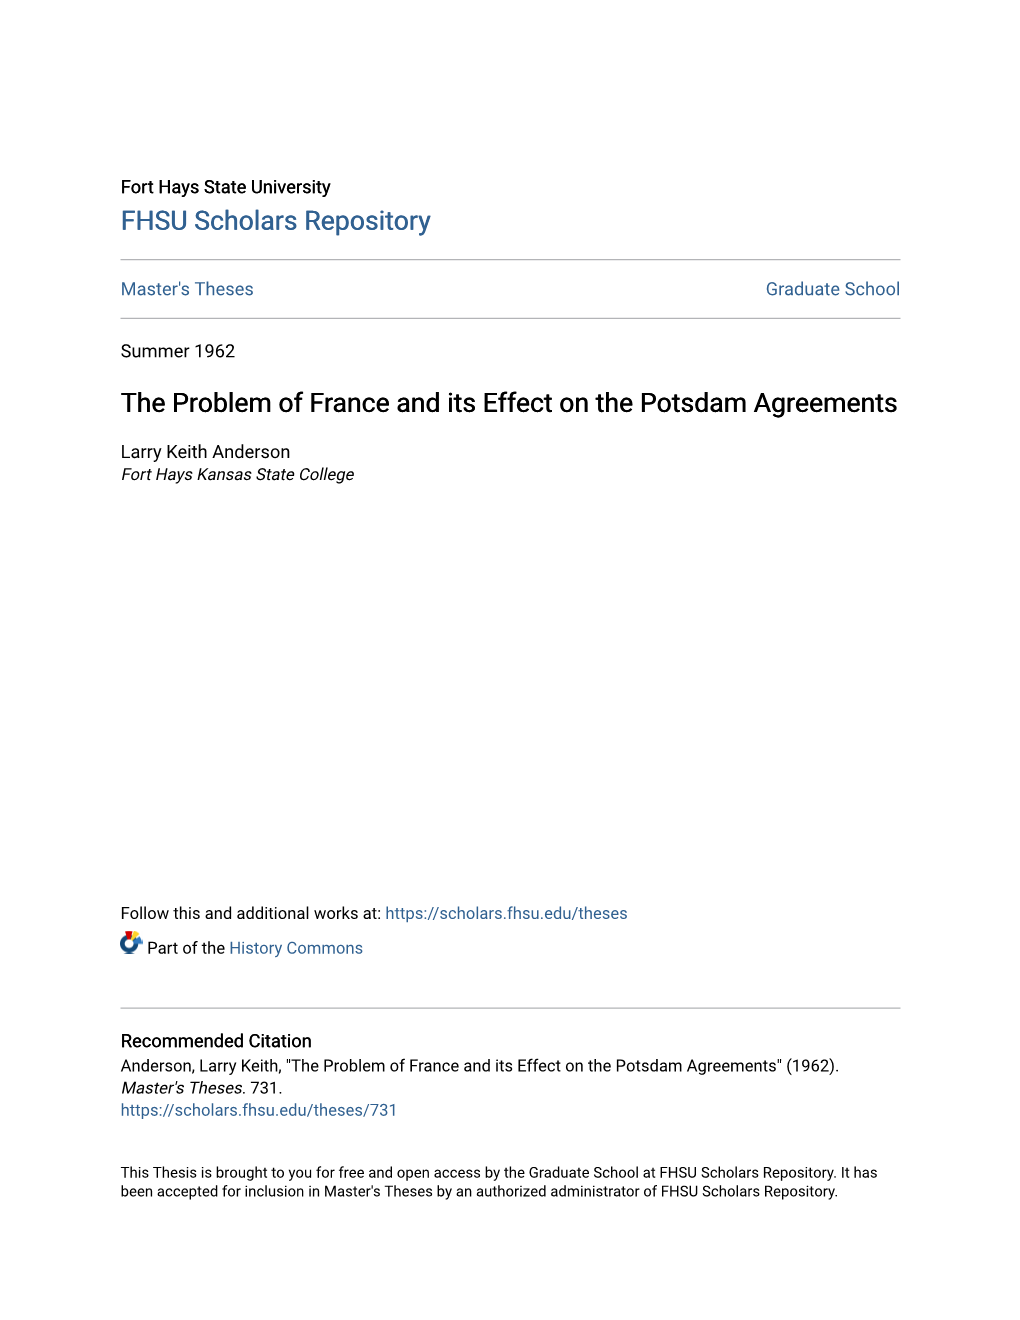 The Problem of France and Its Effect on the Potsdam Agreements